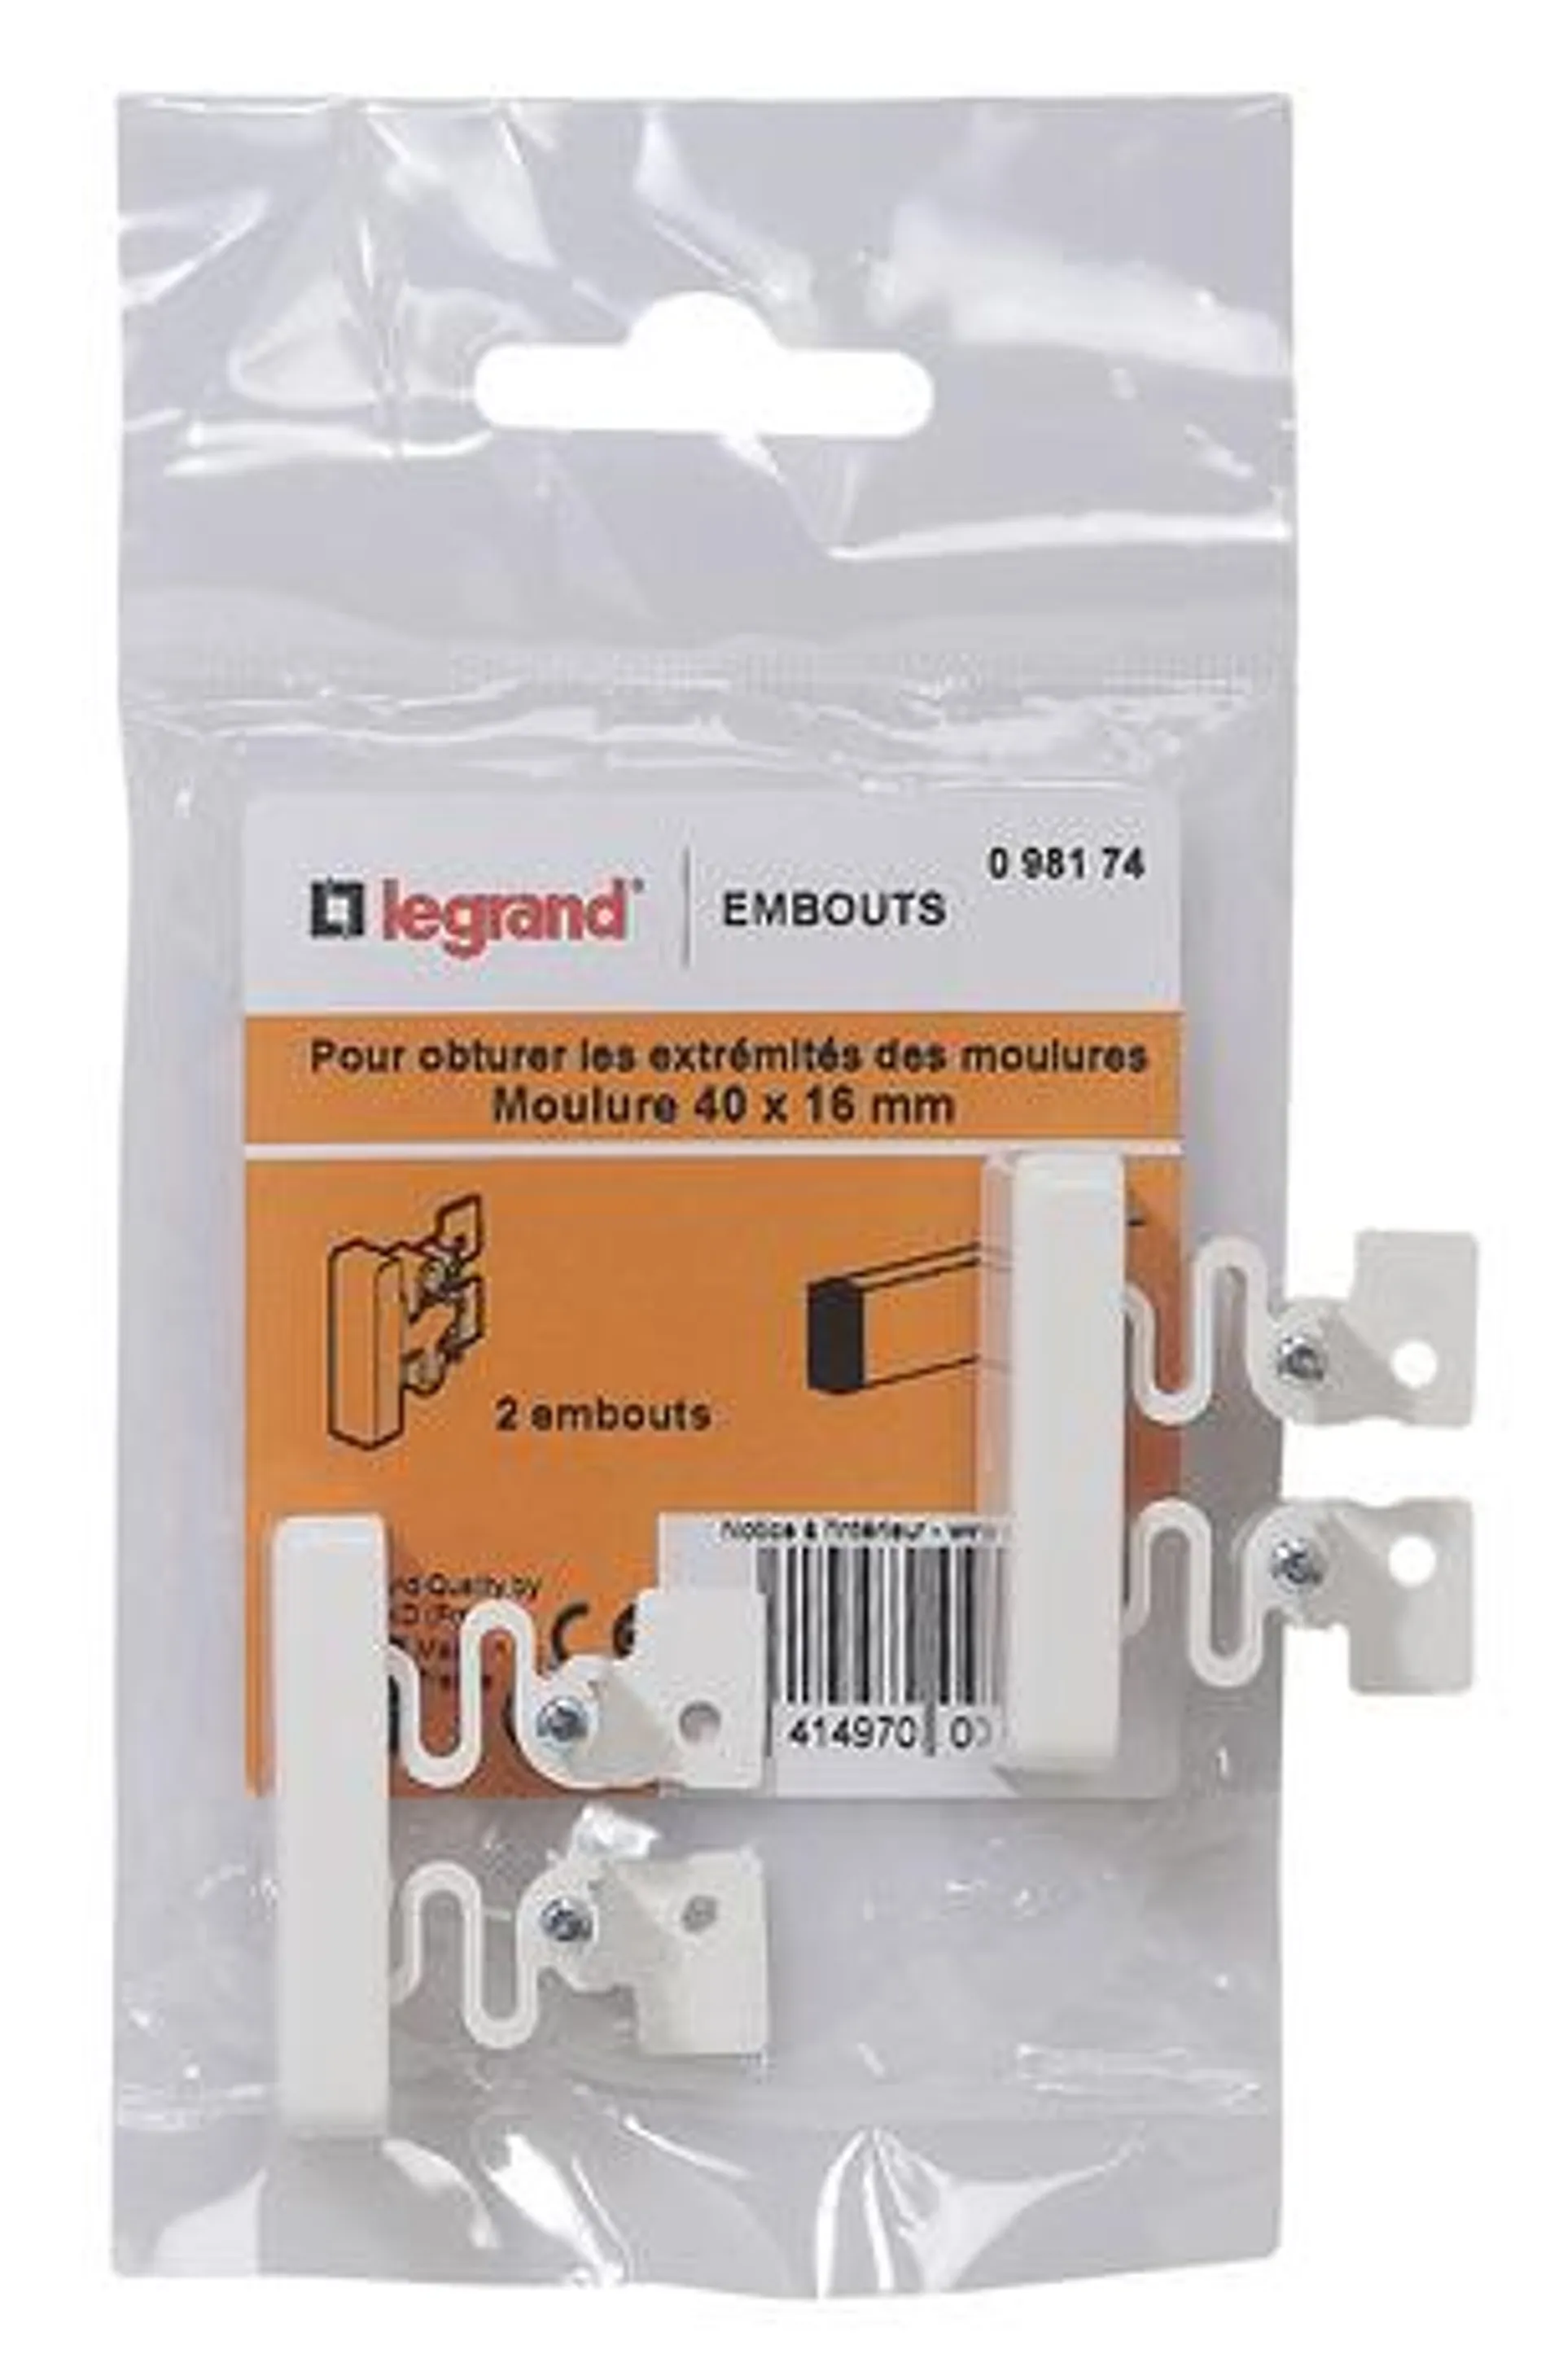 EMBOUT 40X16 LEGRAND Embout - Legrand